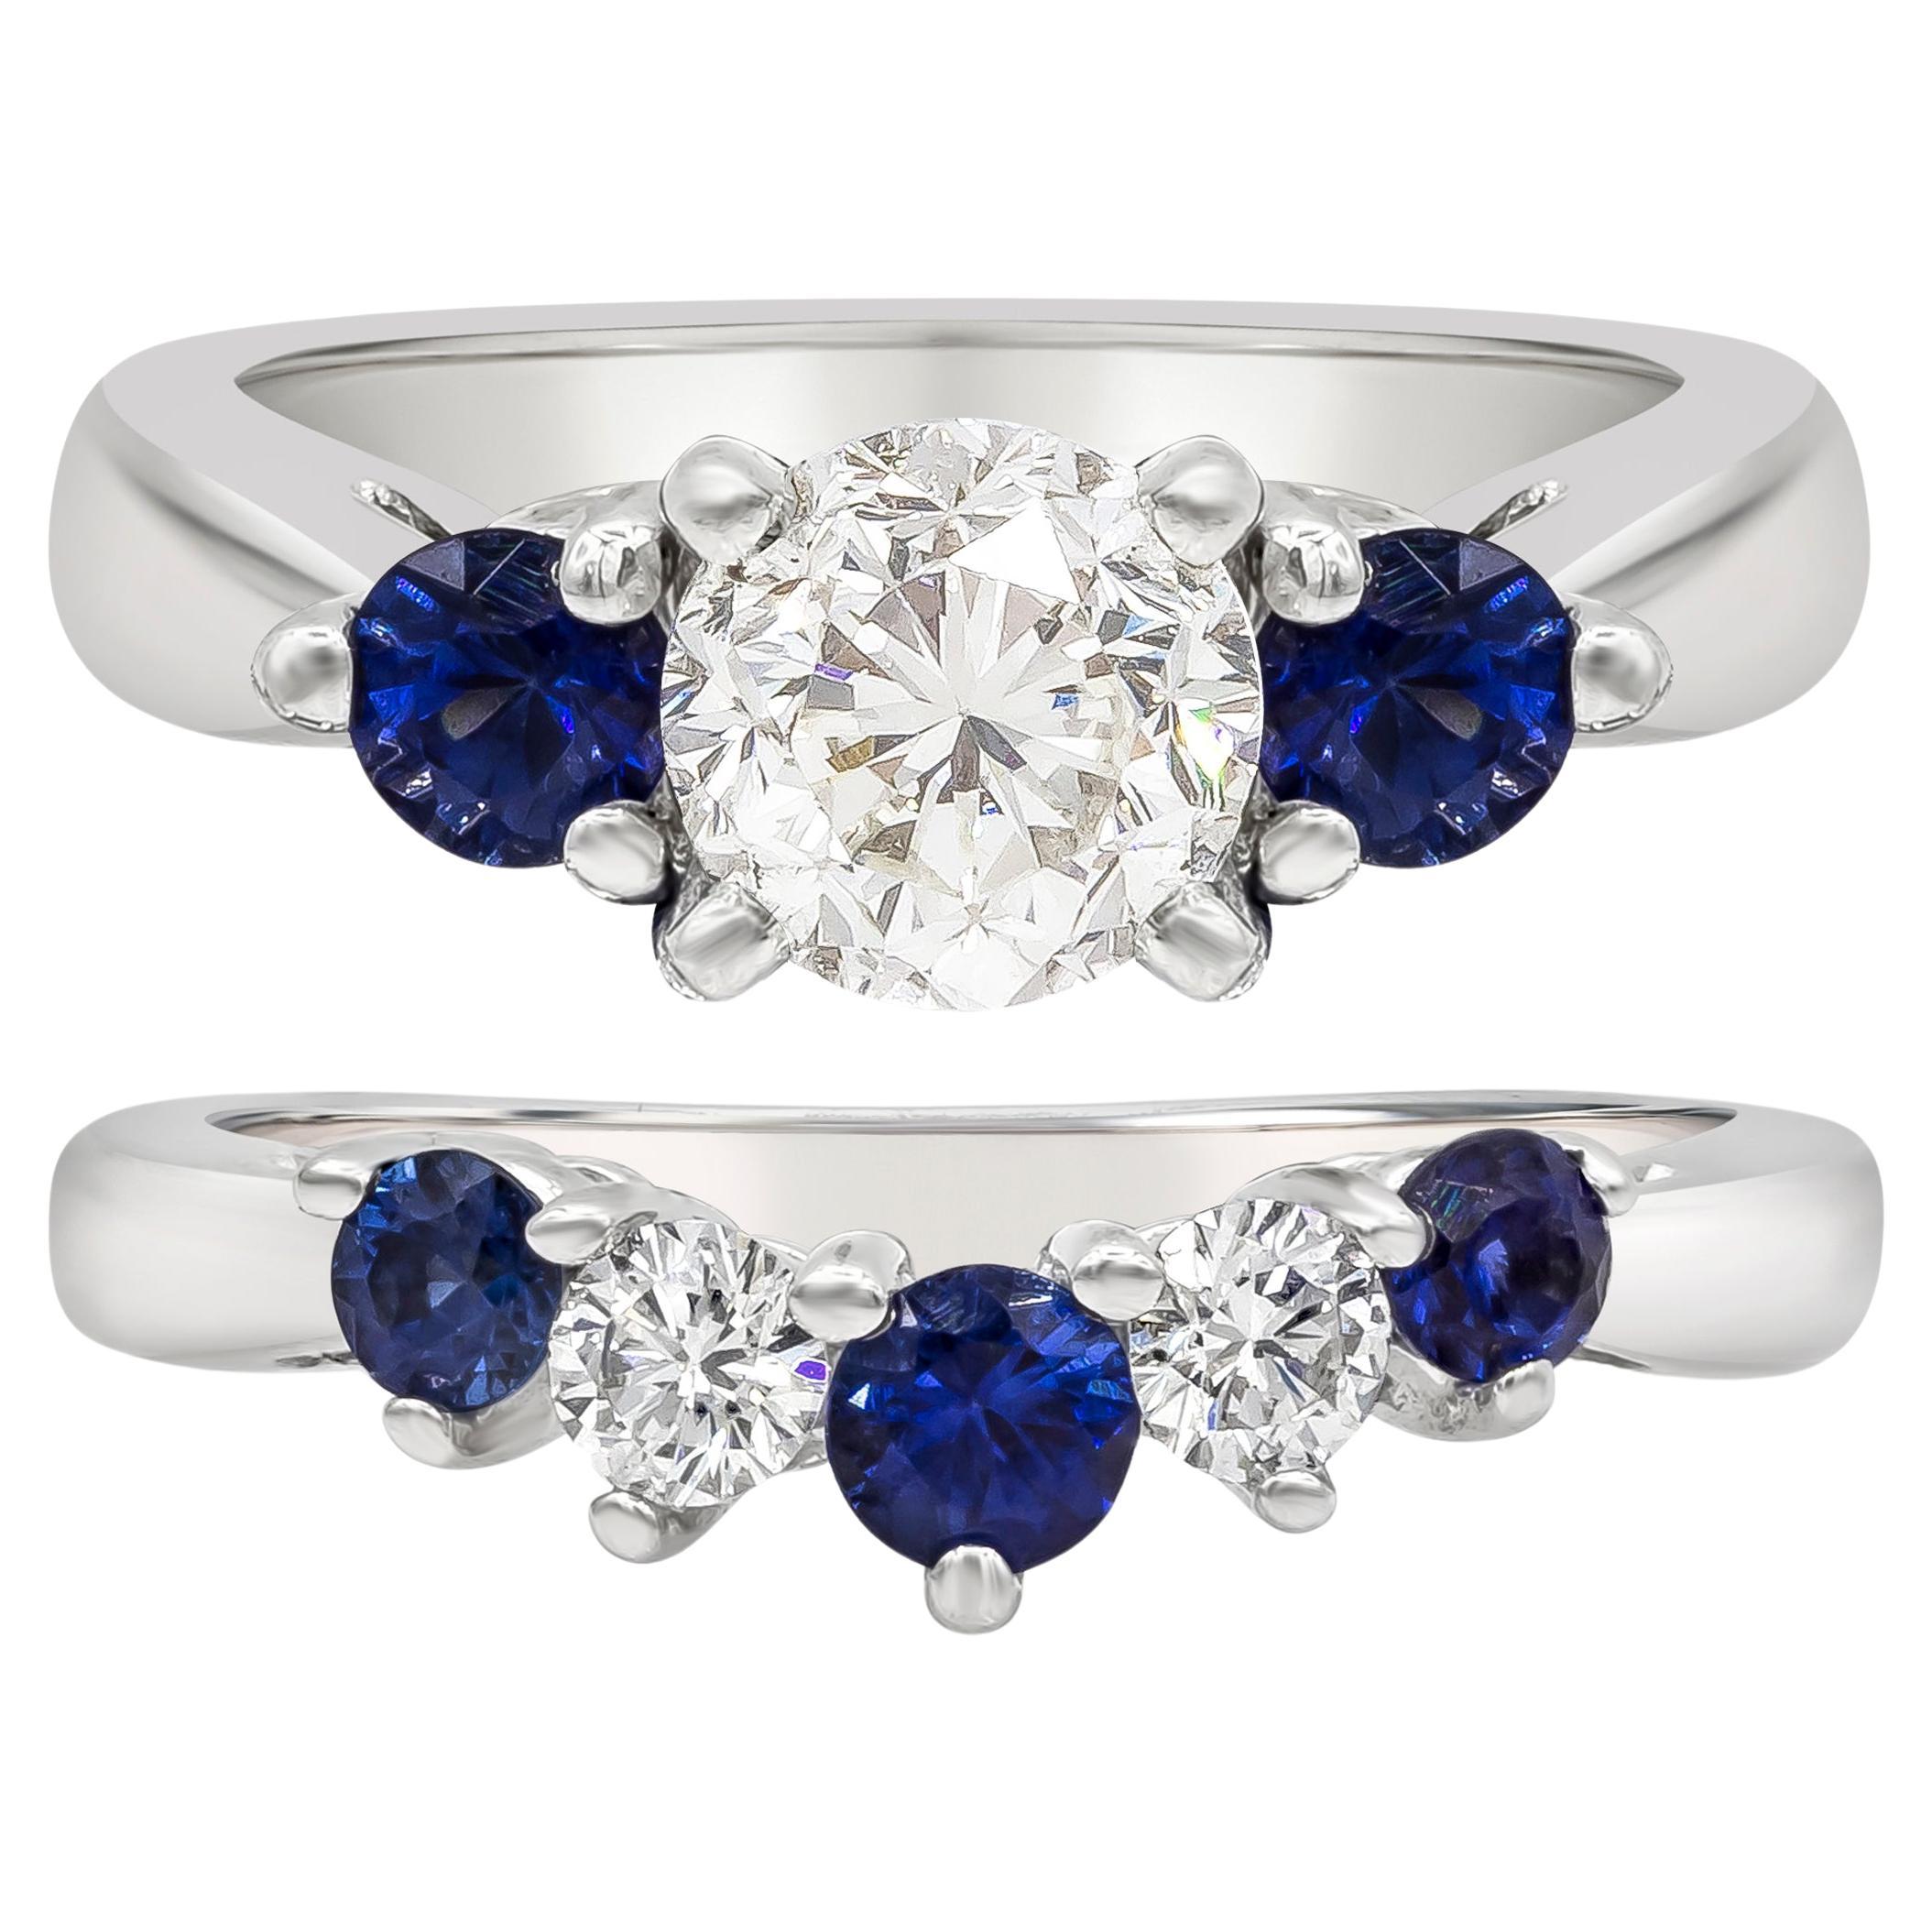 1.89 Carats Total Diamond and Blue Sapphire Wedding Band & Engagement Ring Set For Sale